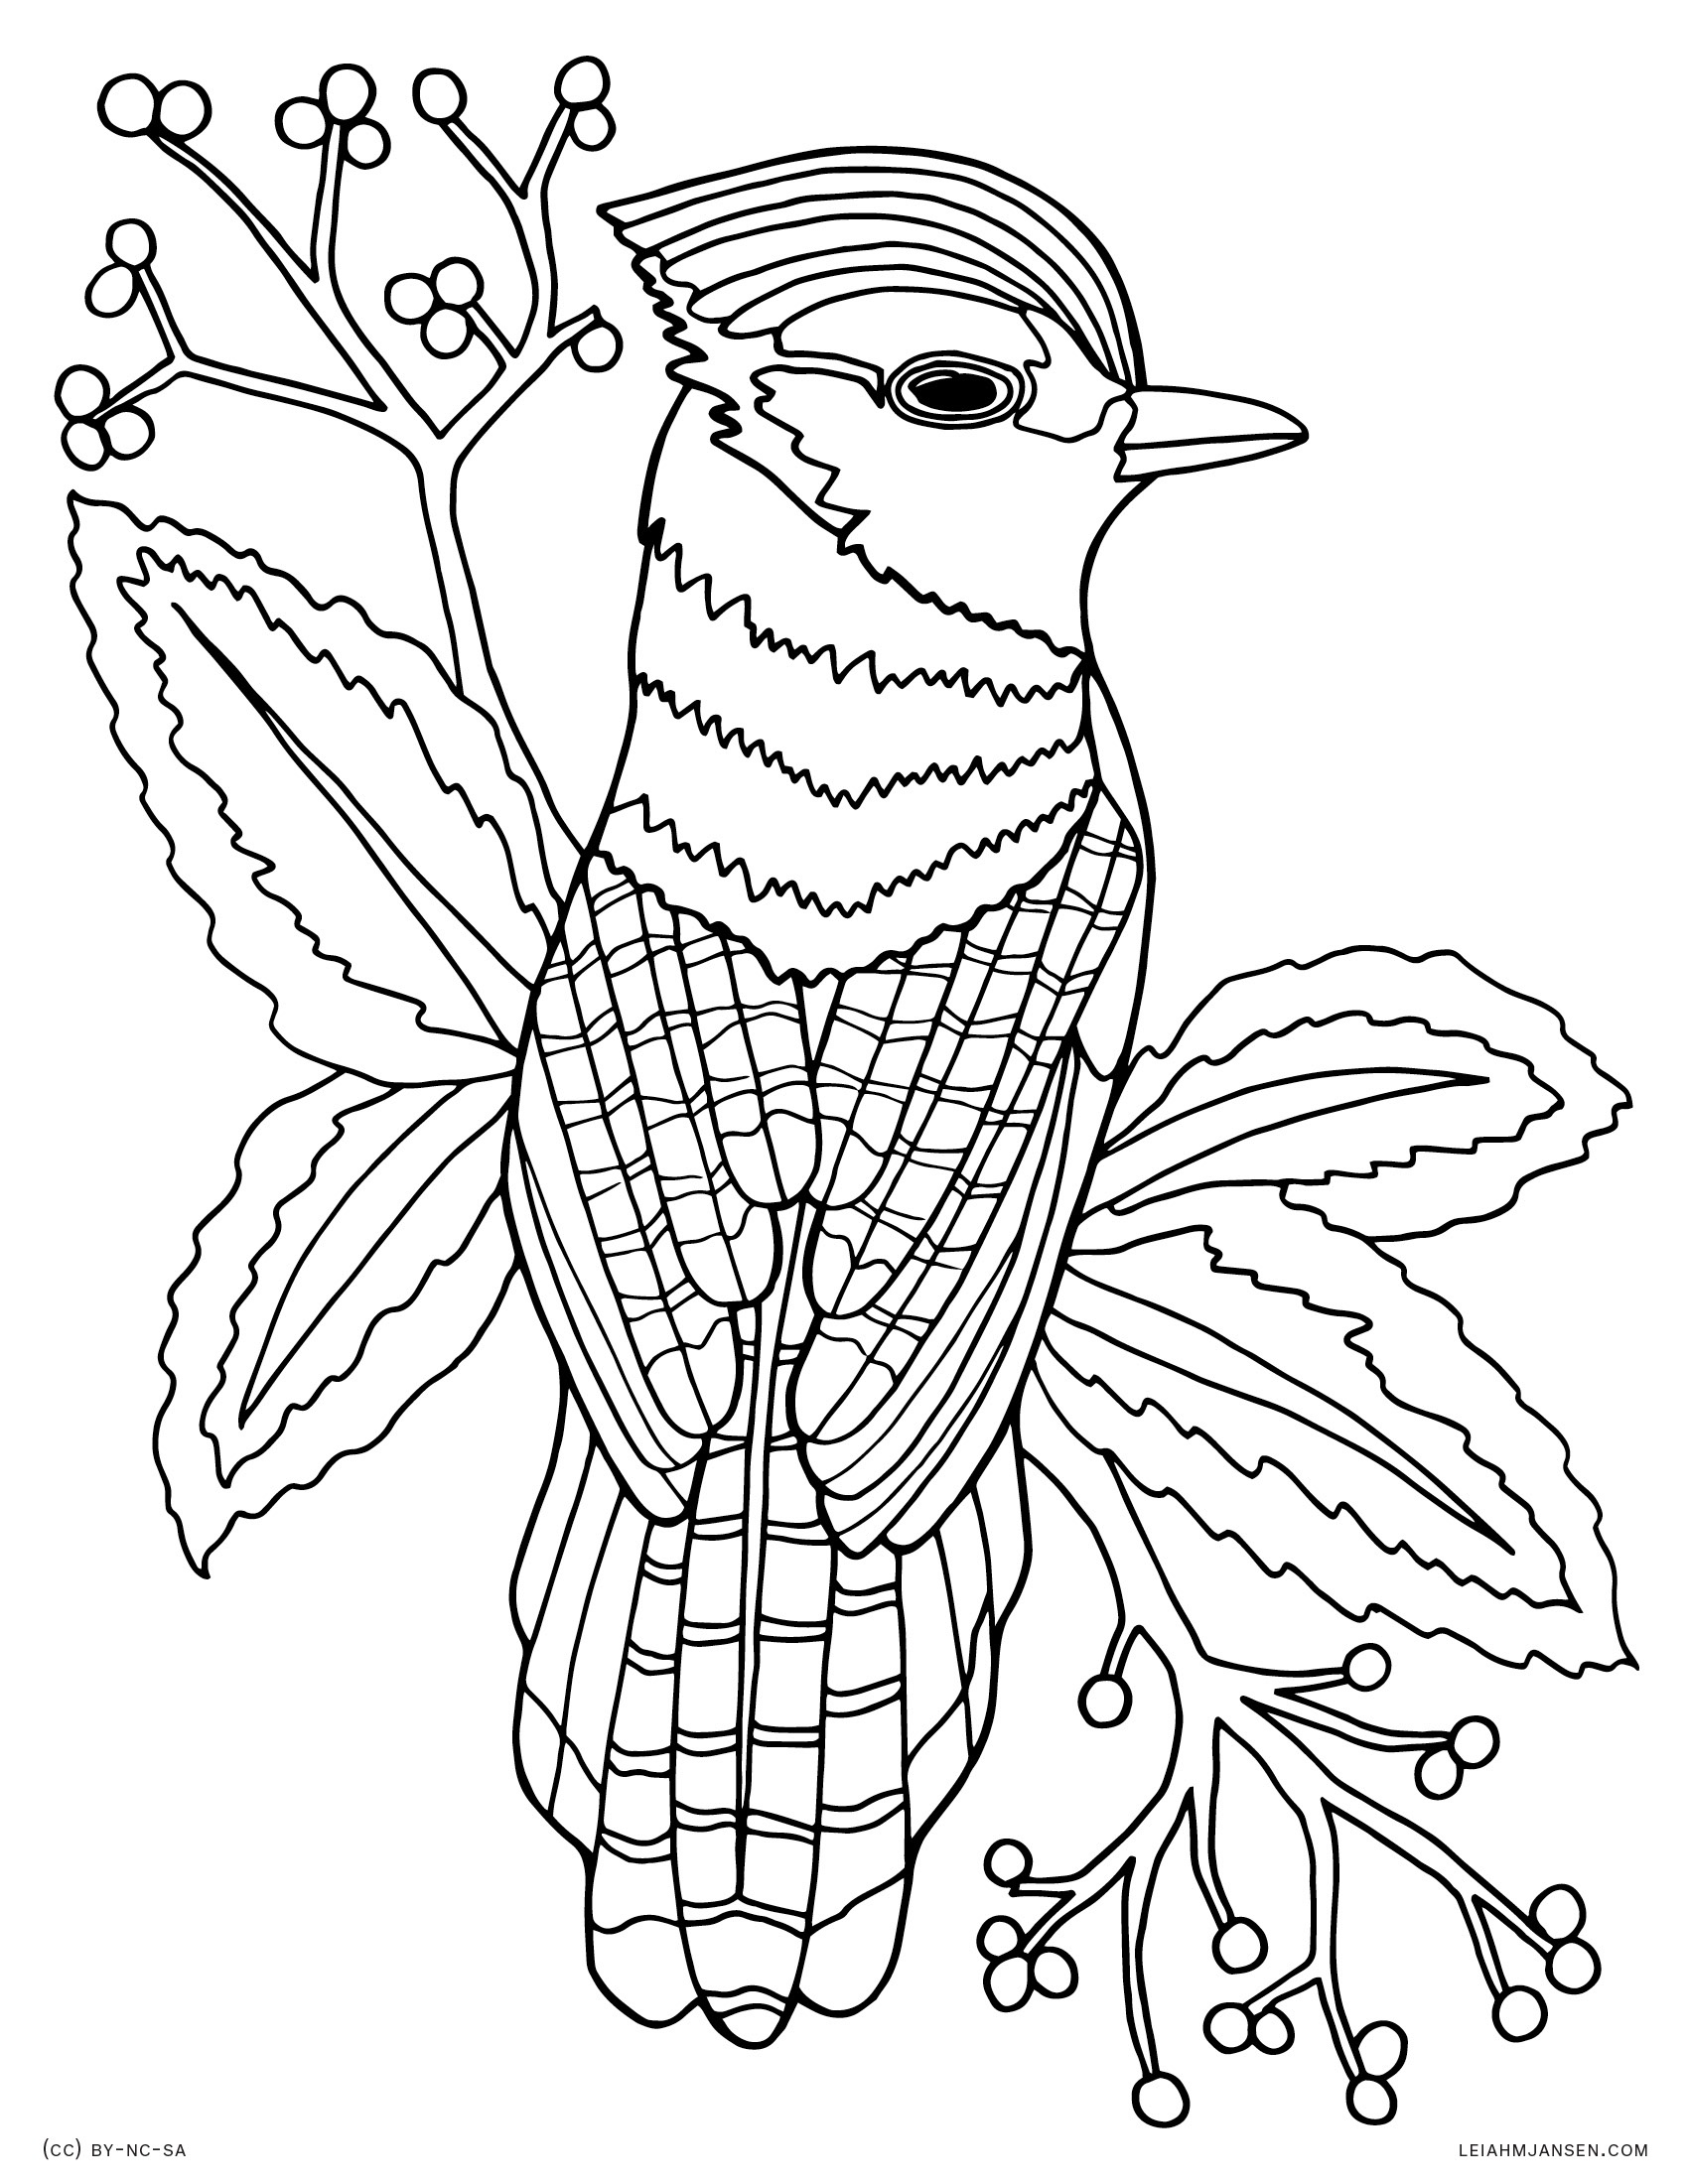 Coloring Pages Free Coloring Pages Com Printable Free Printable A To Z